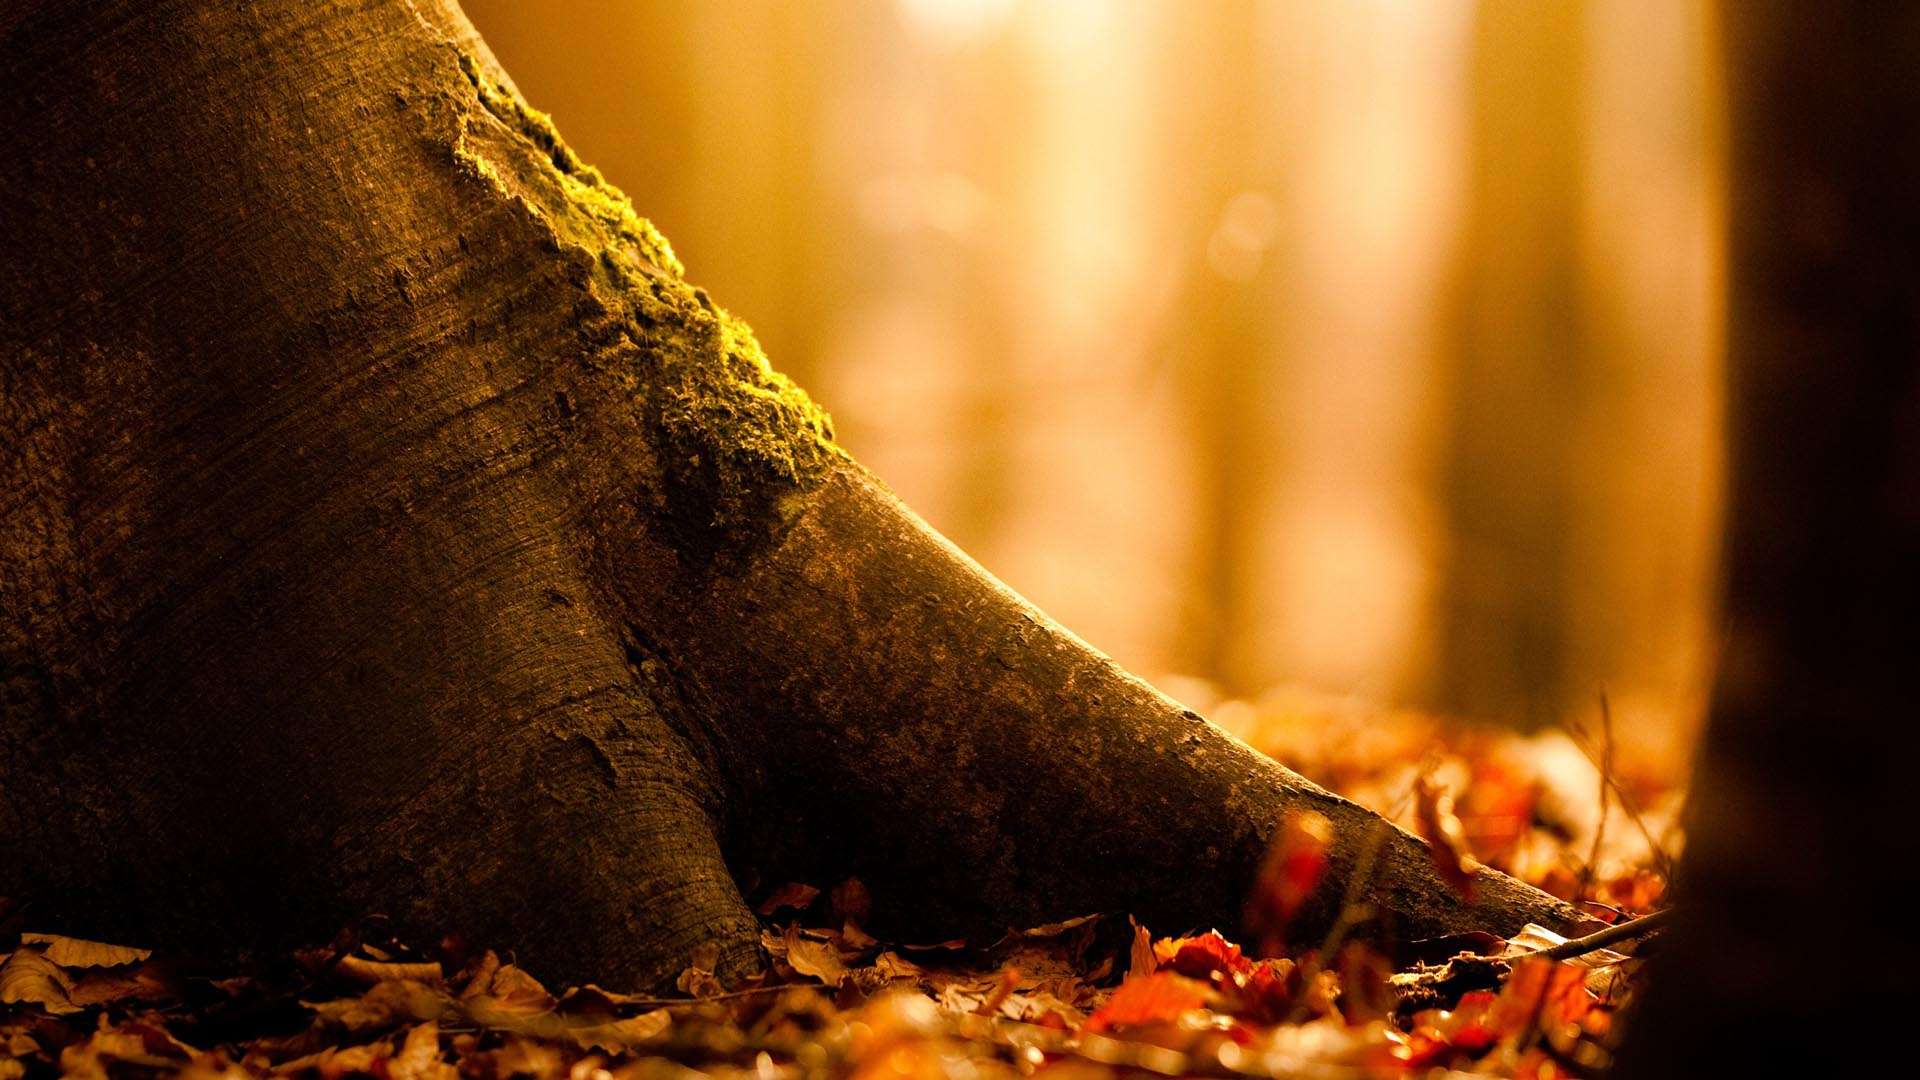 Roots Of Fall HD Wallpaper Gallery